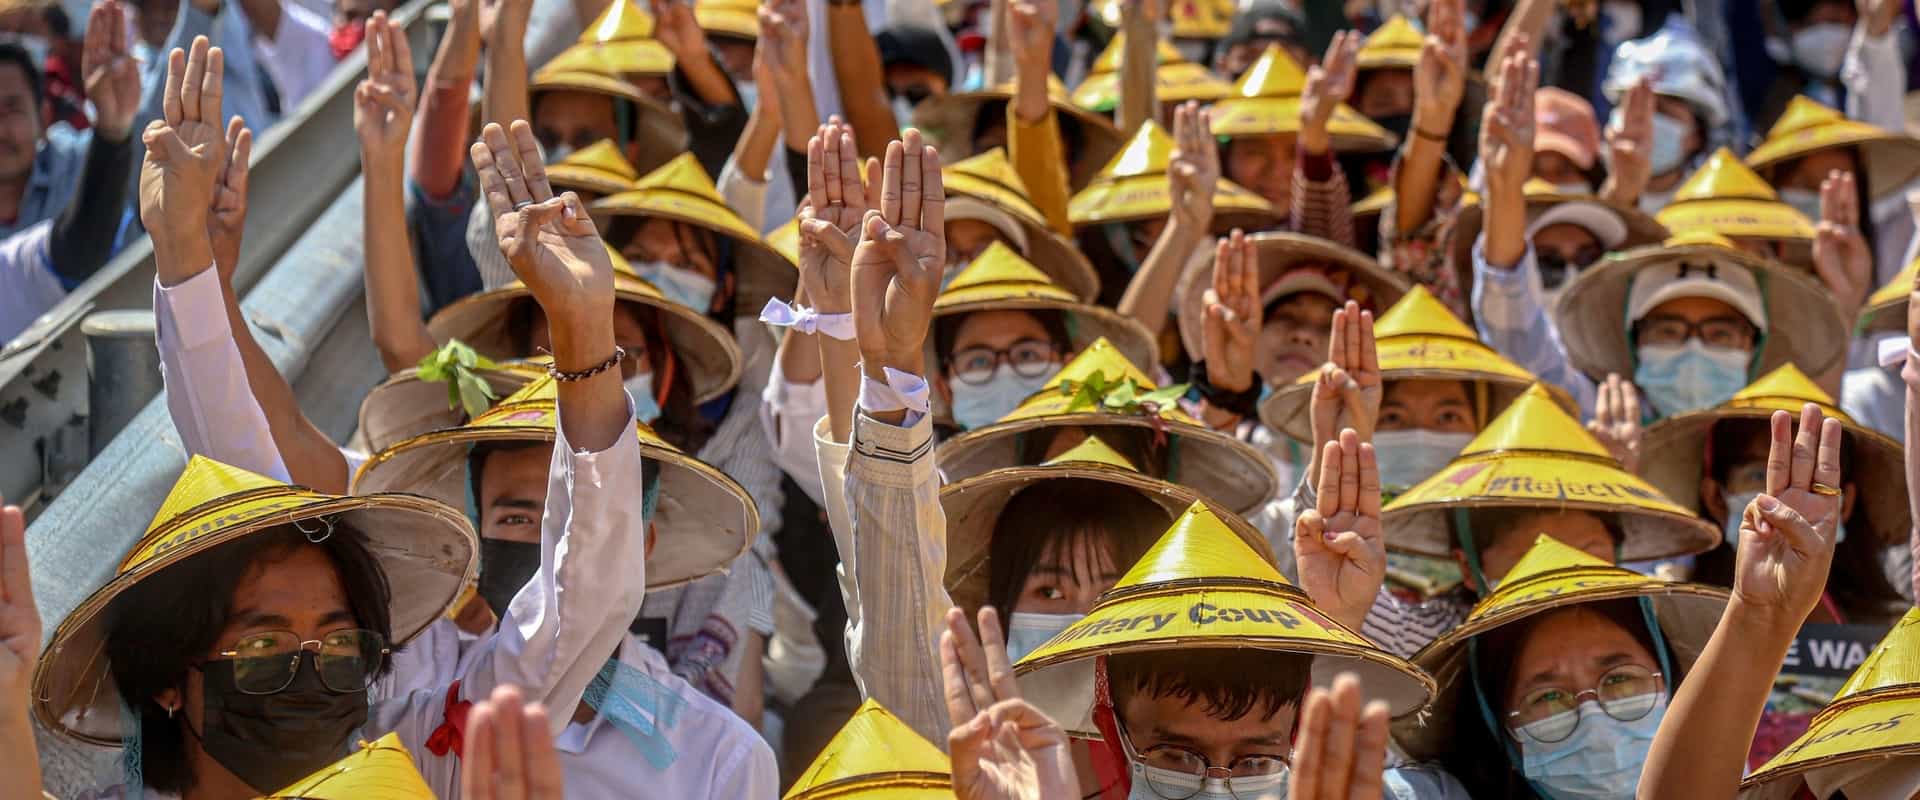 Global Cost of Internet Shutdowns header image showing marches in Myanmar